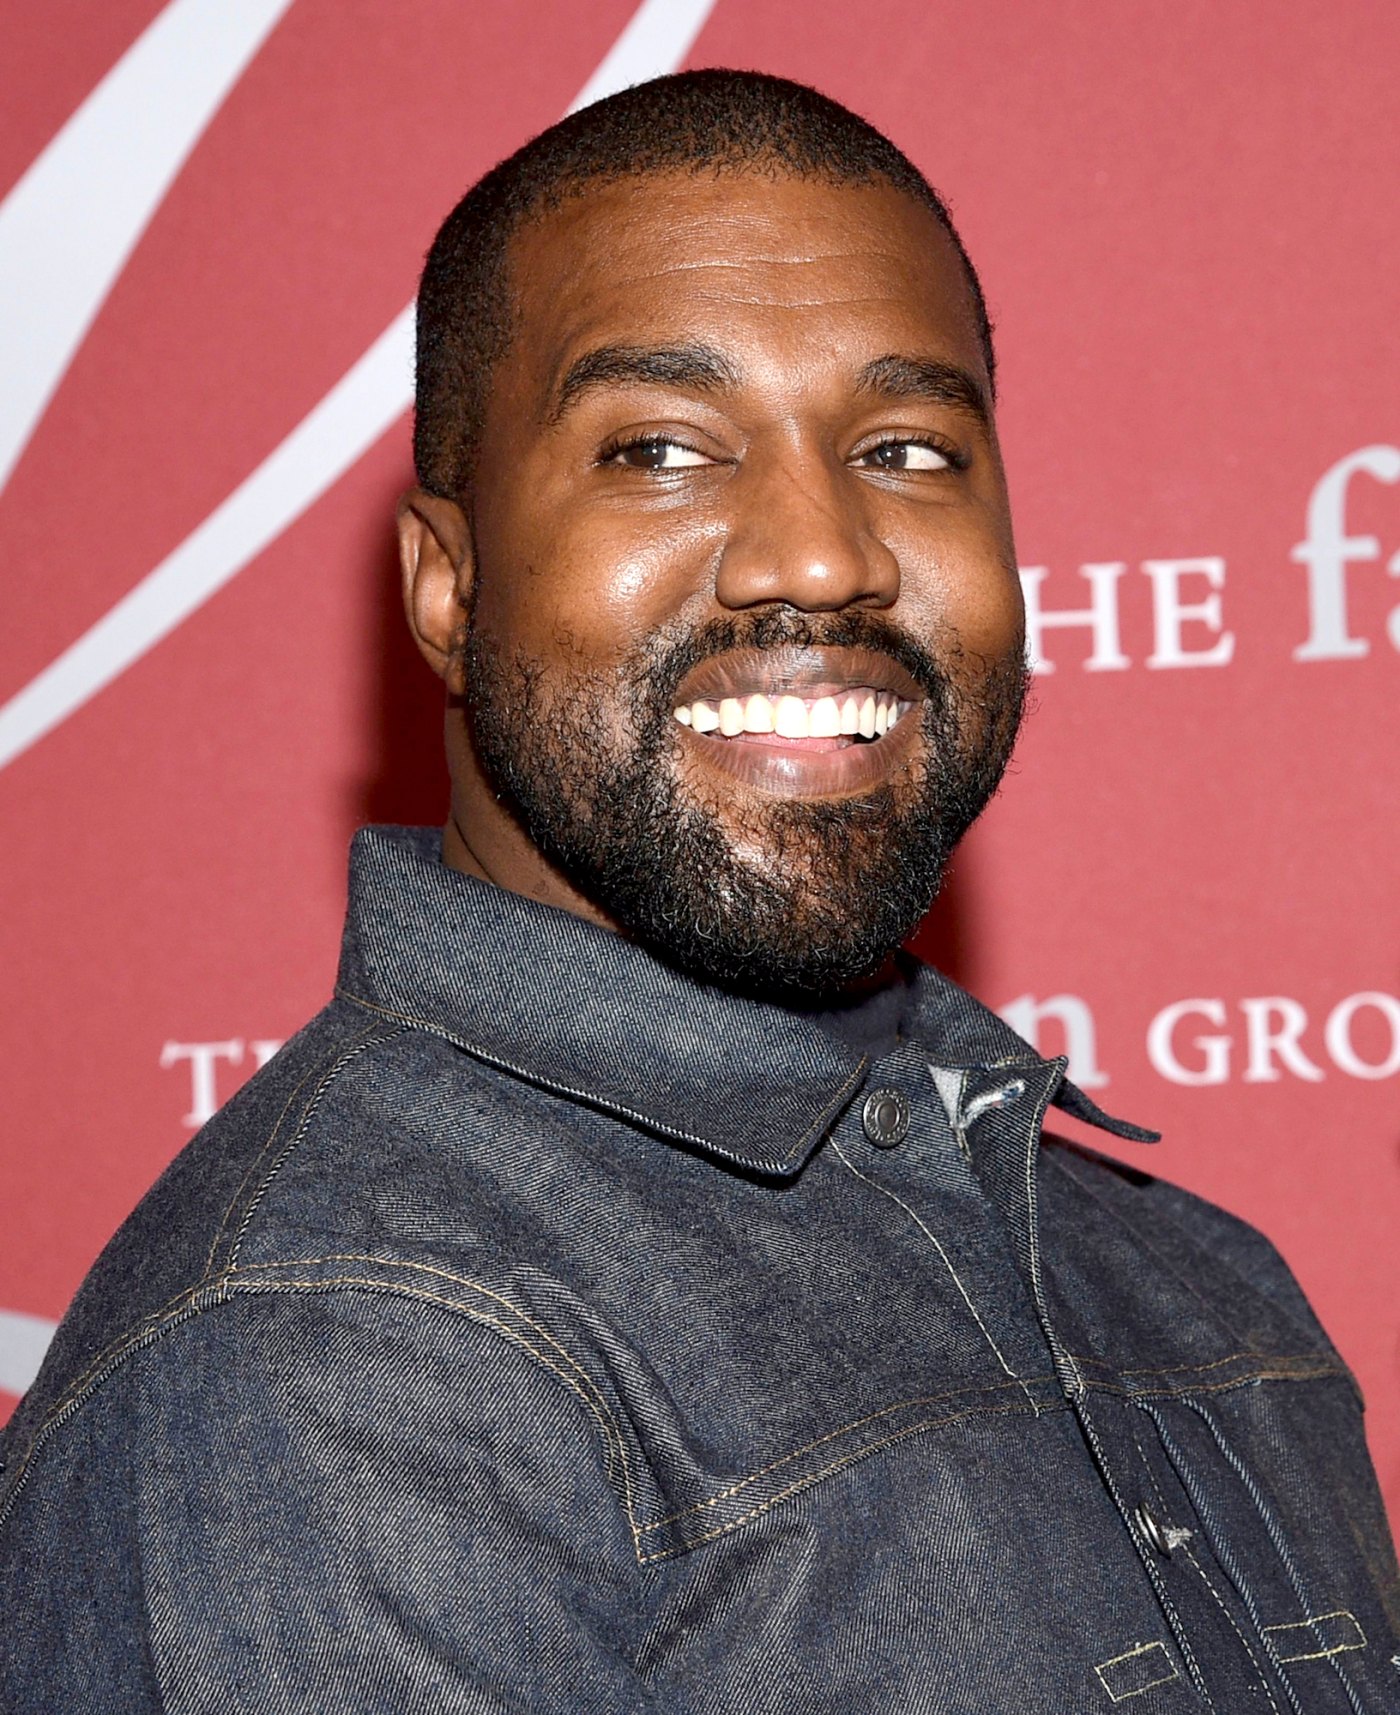 Kanye West Considers Changing Name to Christian Genius Billionaire ...